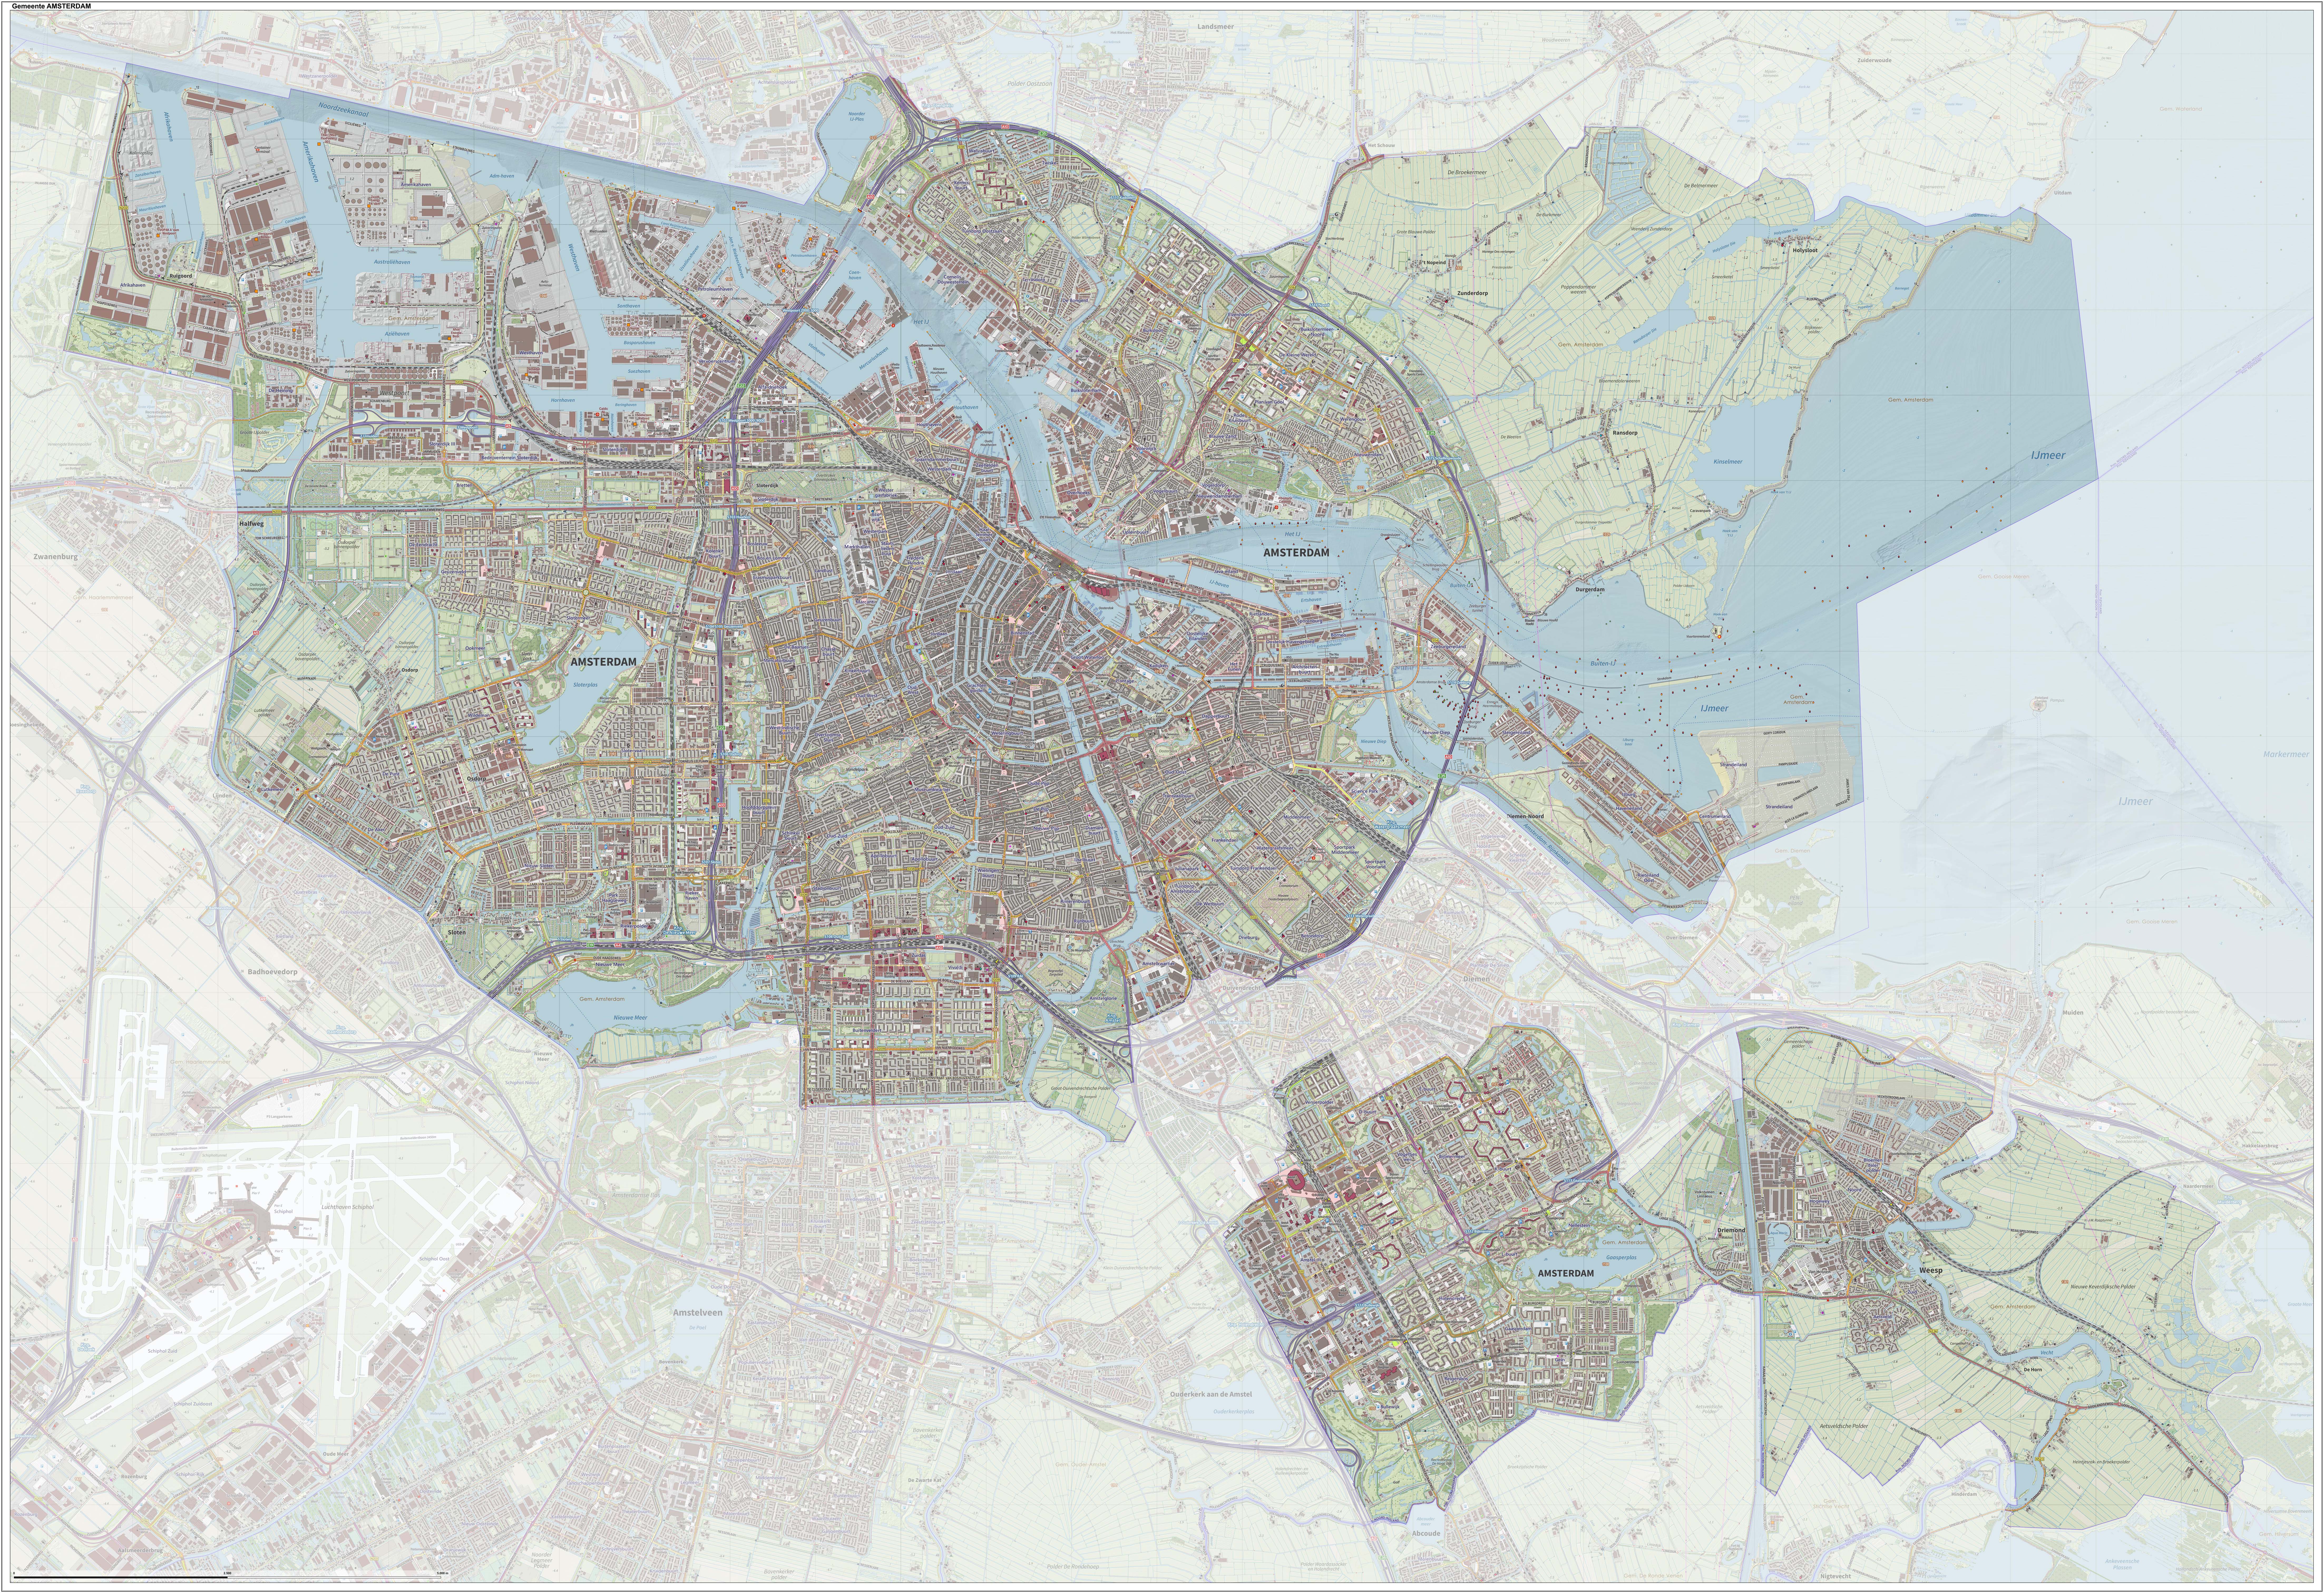 Topographic map of Amsterdam.